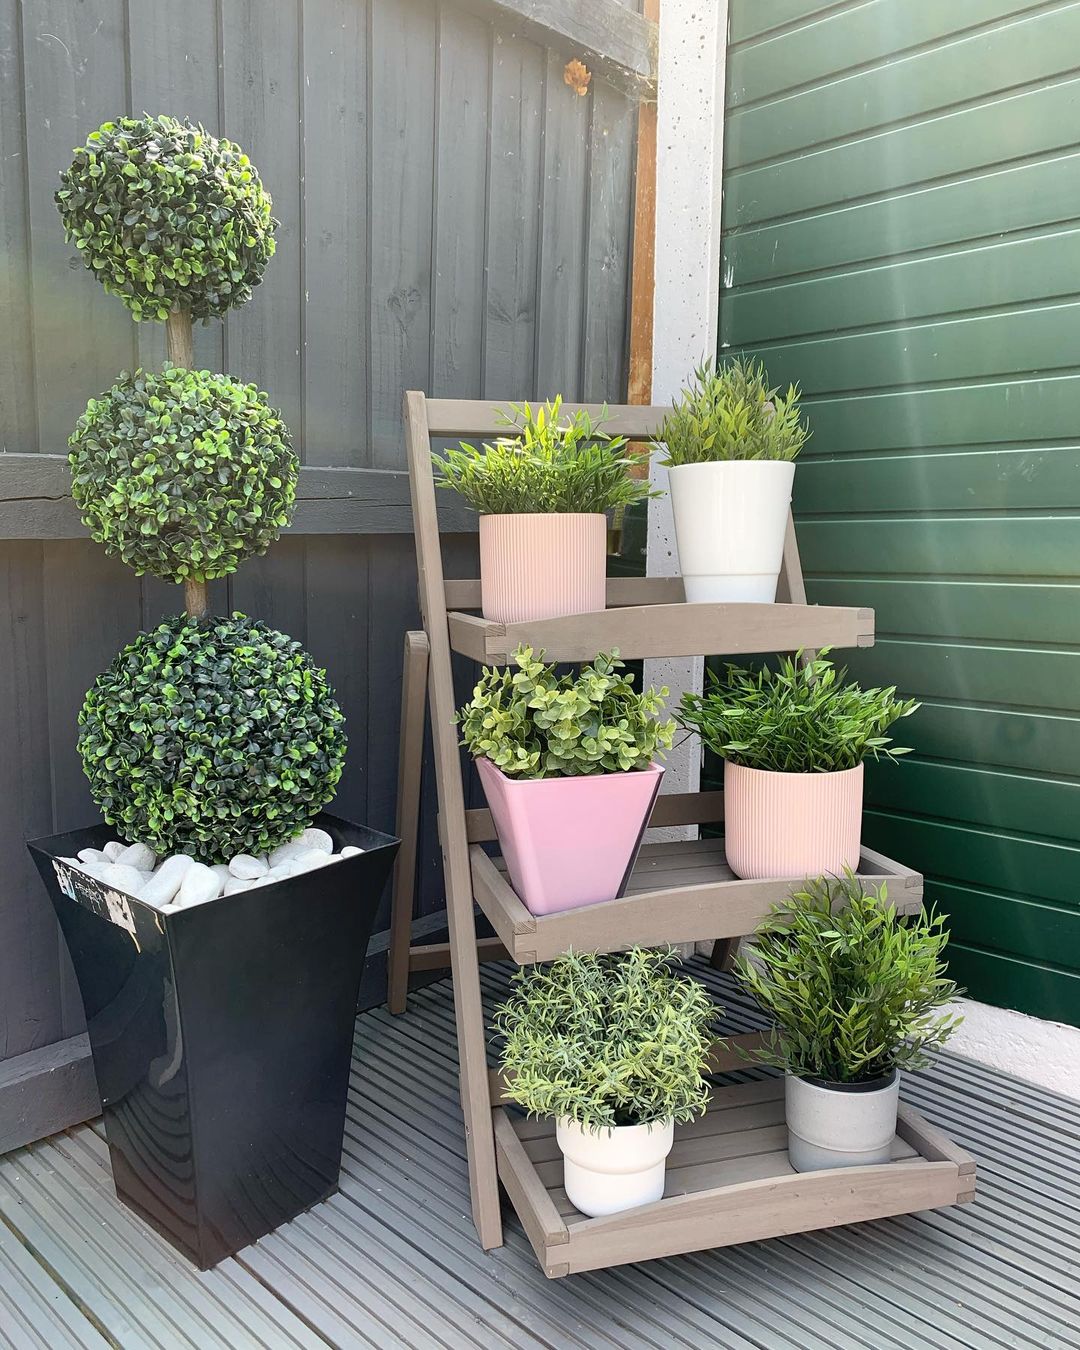 Garden ladder with potted plants painted different colors in a quiet corner. Photo by instagram user @millsfieldfamilyhome